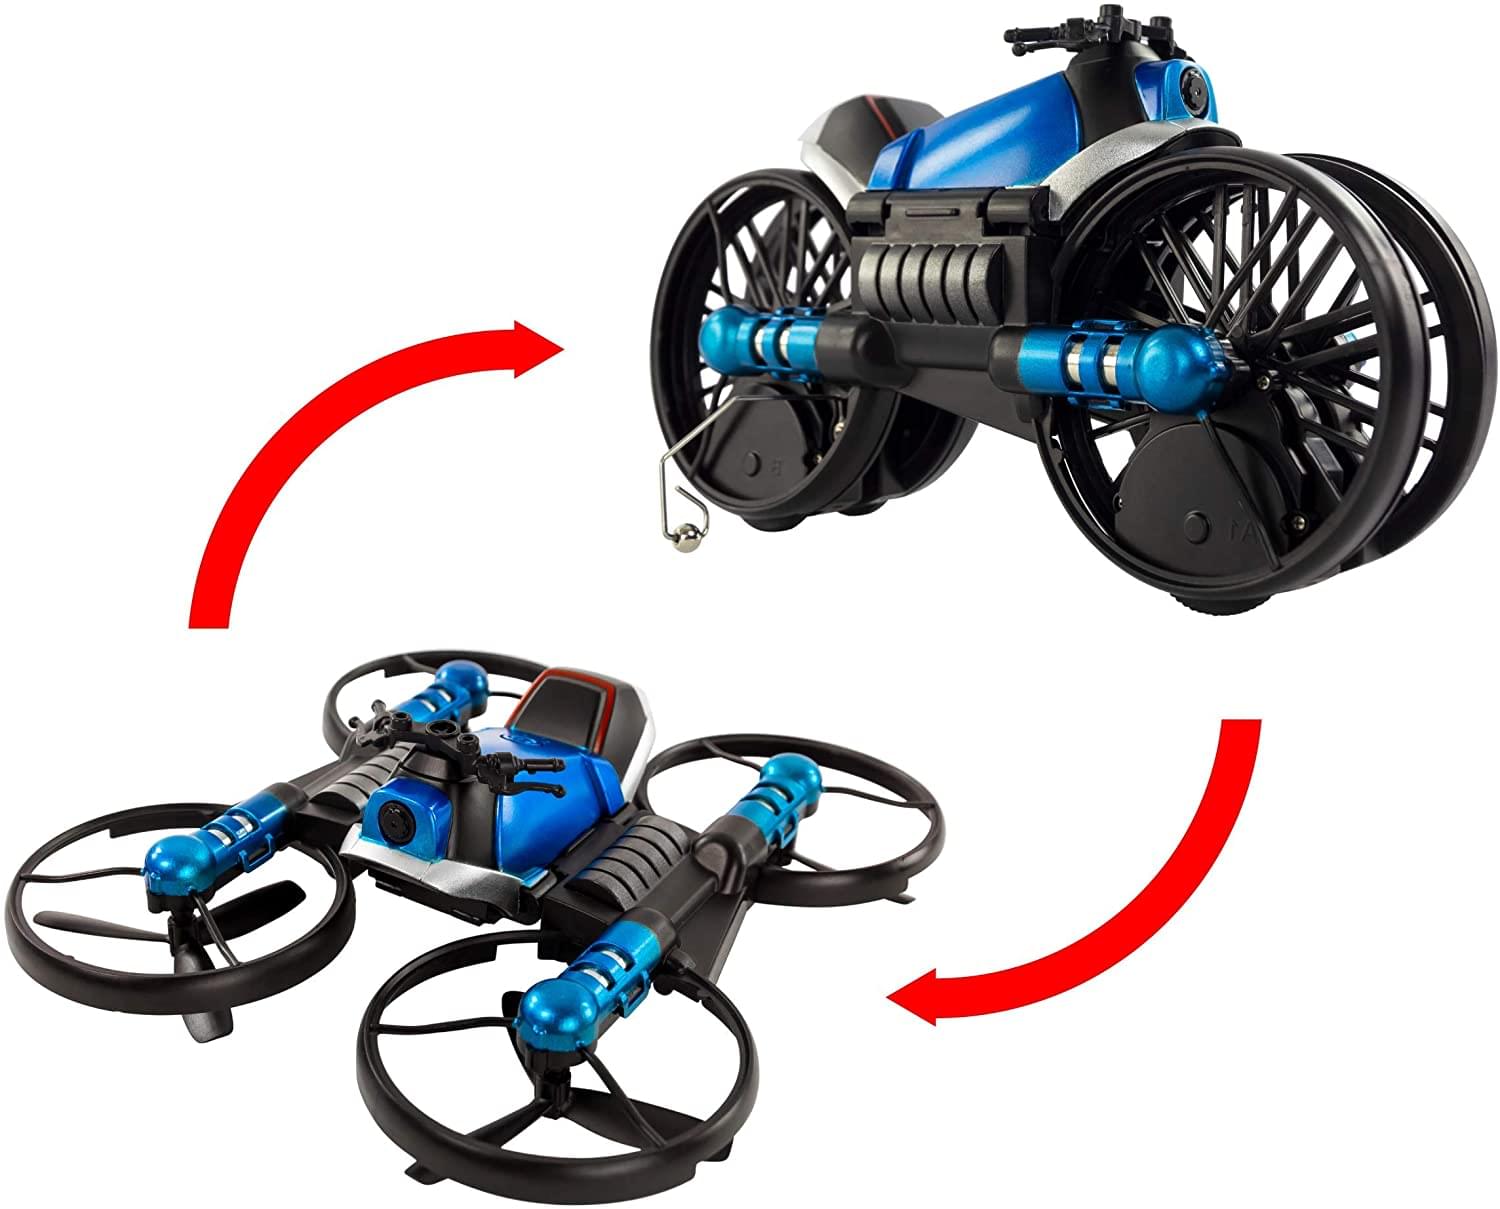 Drone 2 Bike , Two-in-One Vehicle Transforms From Drone To Motorcycle